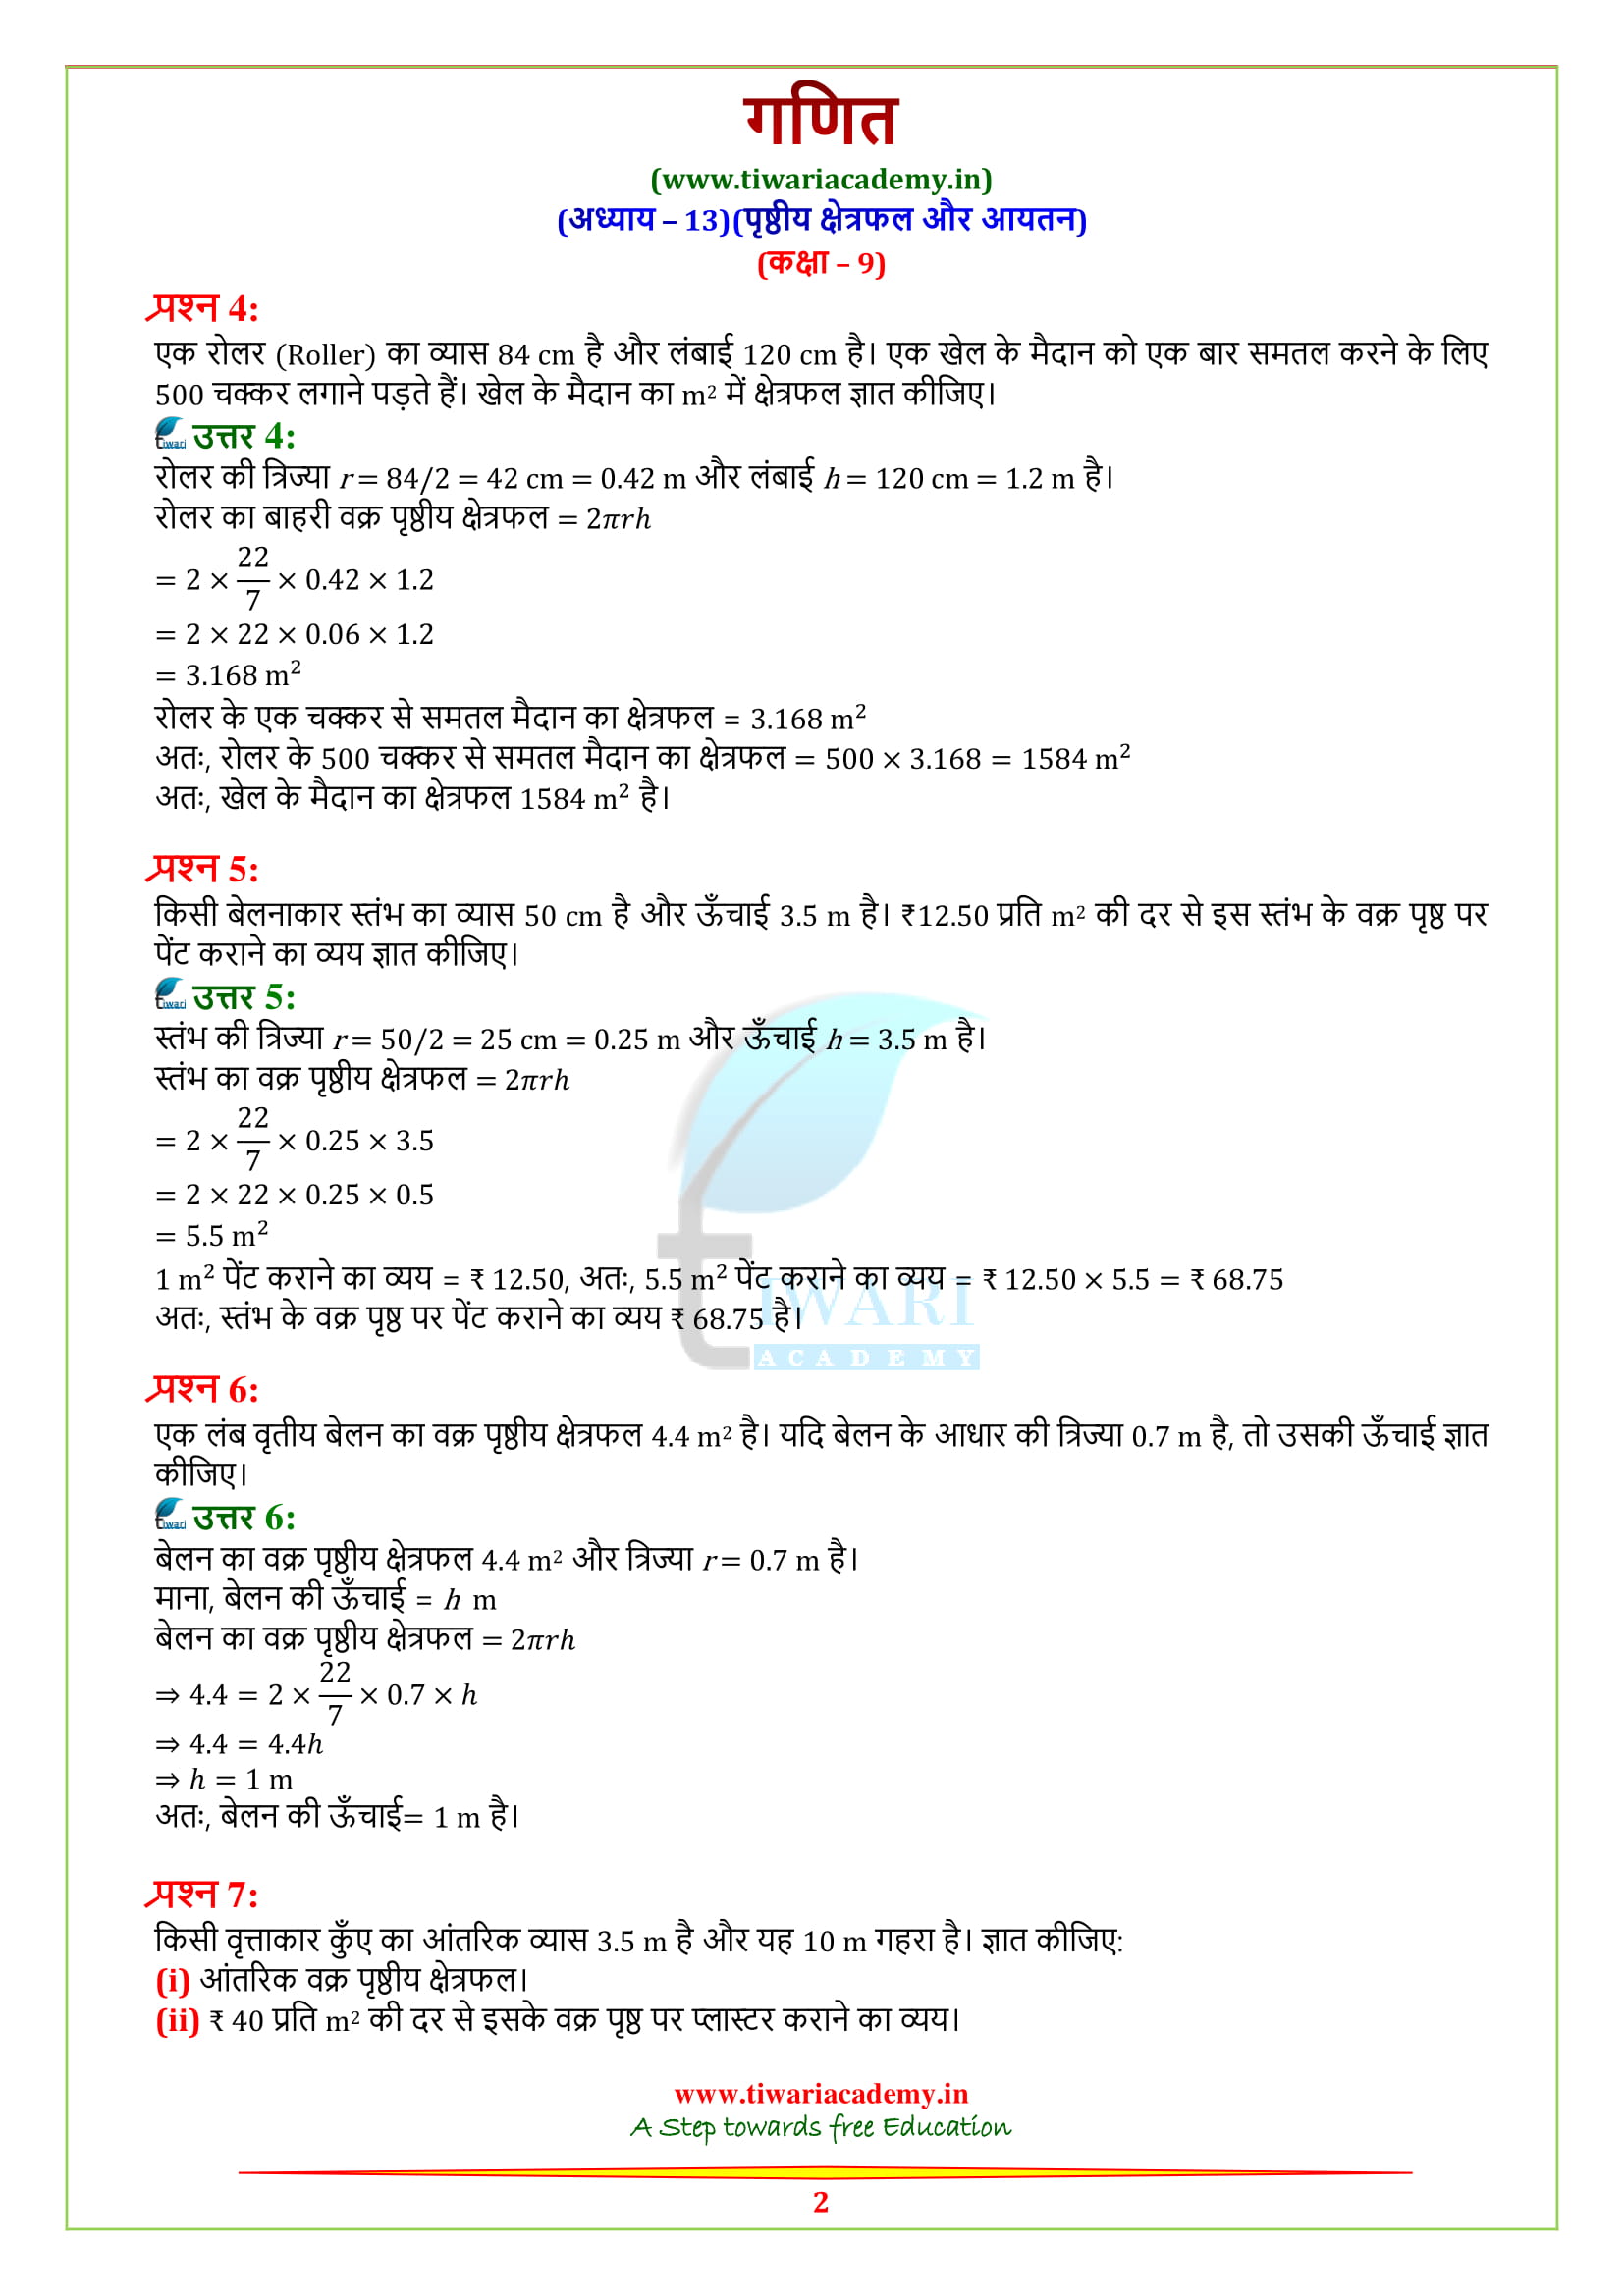 NCERT Solutions for class 9 Exercise 13.2 free to use